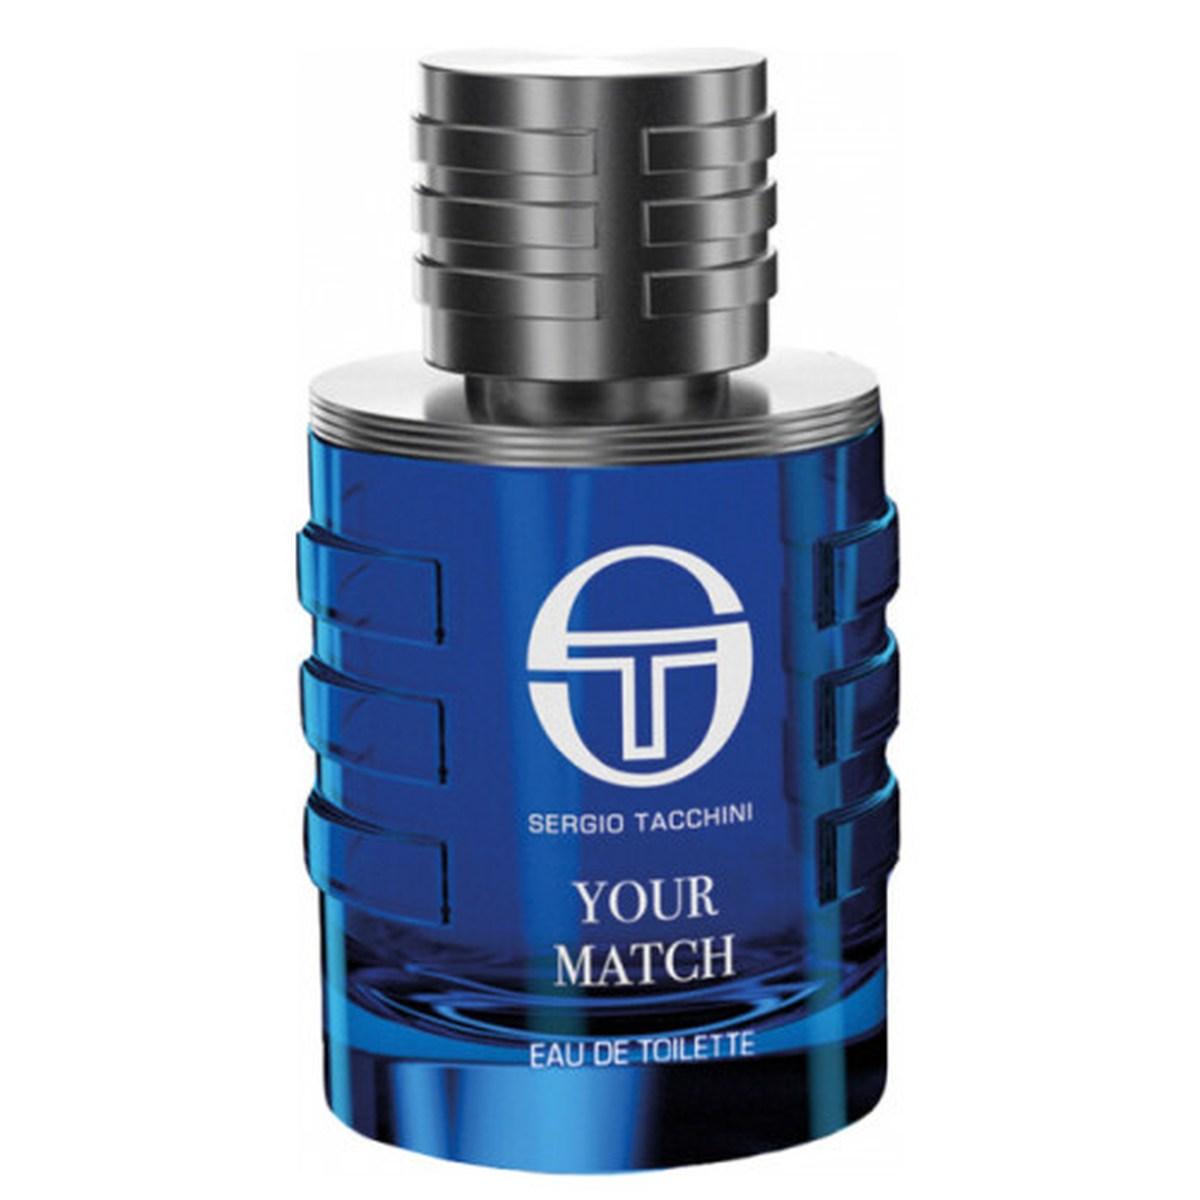 Your match 100 ml